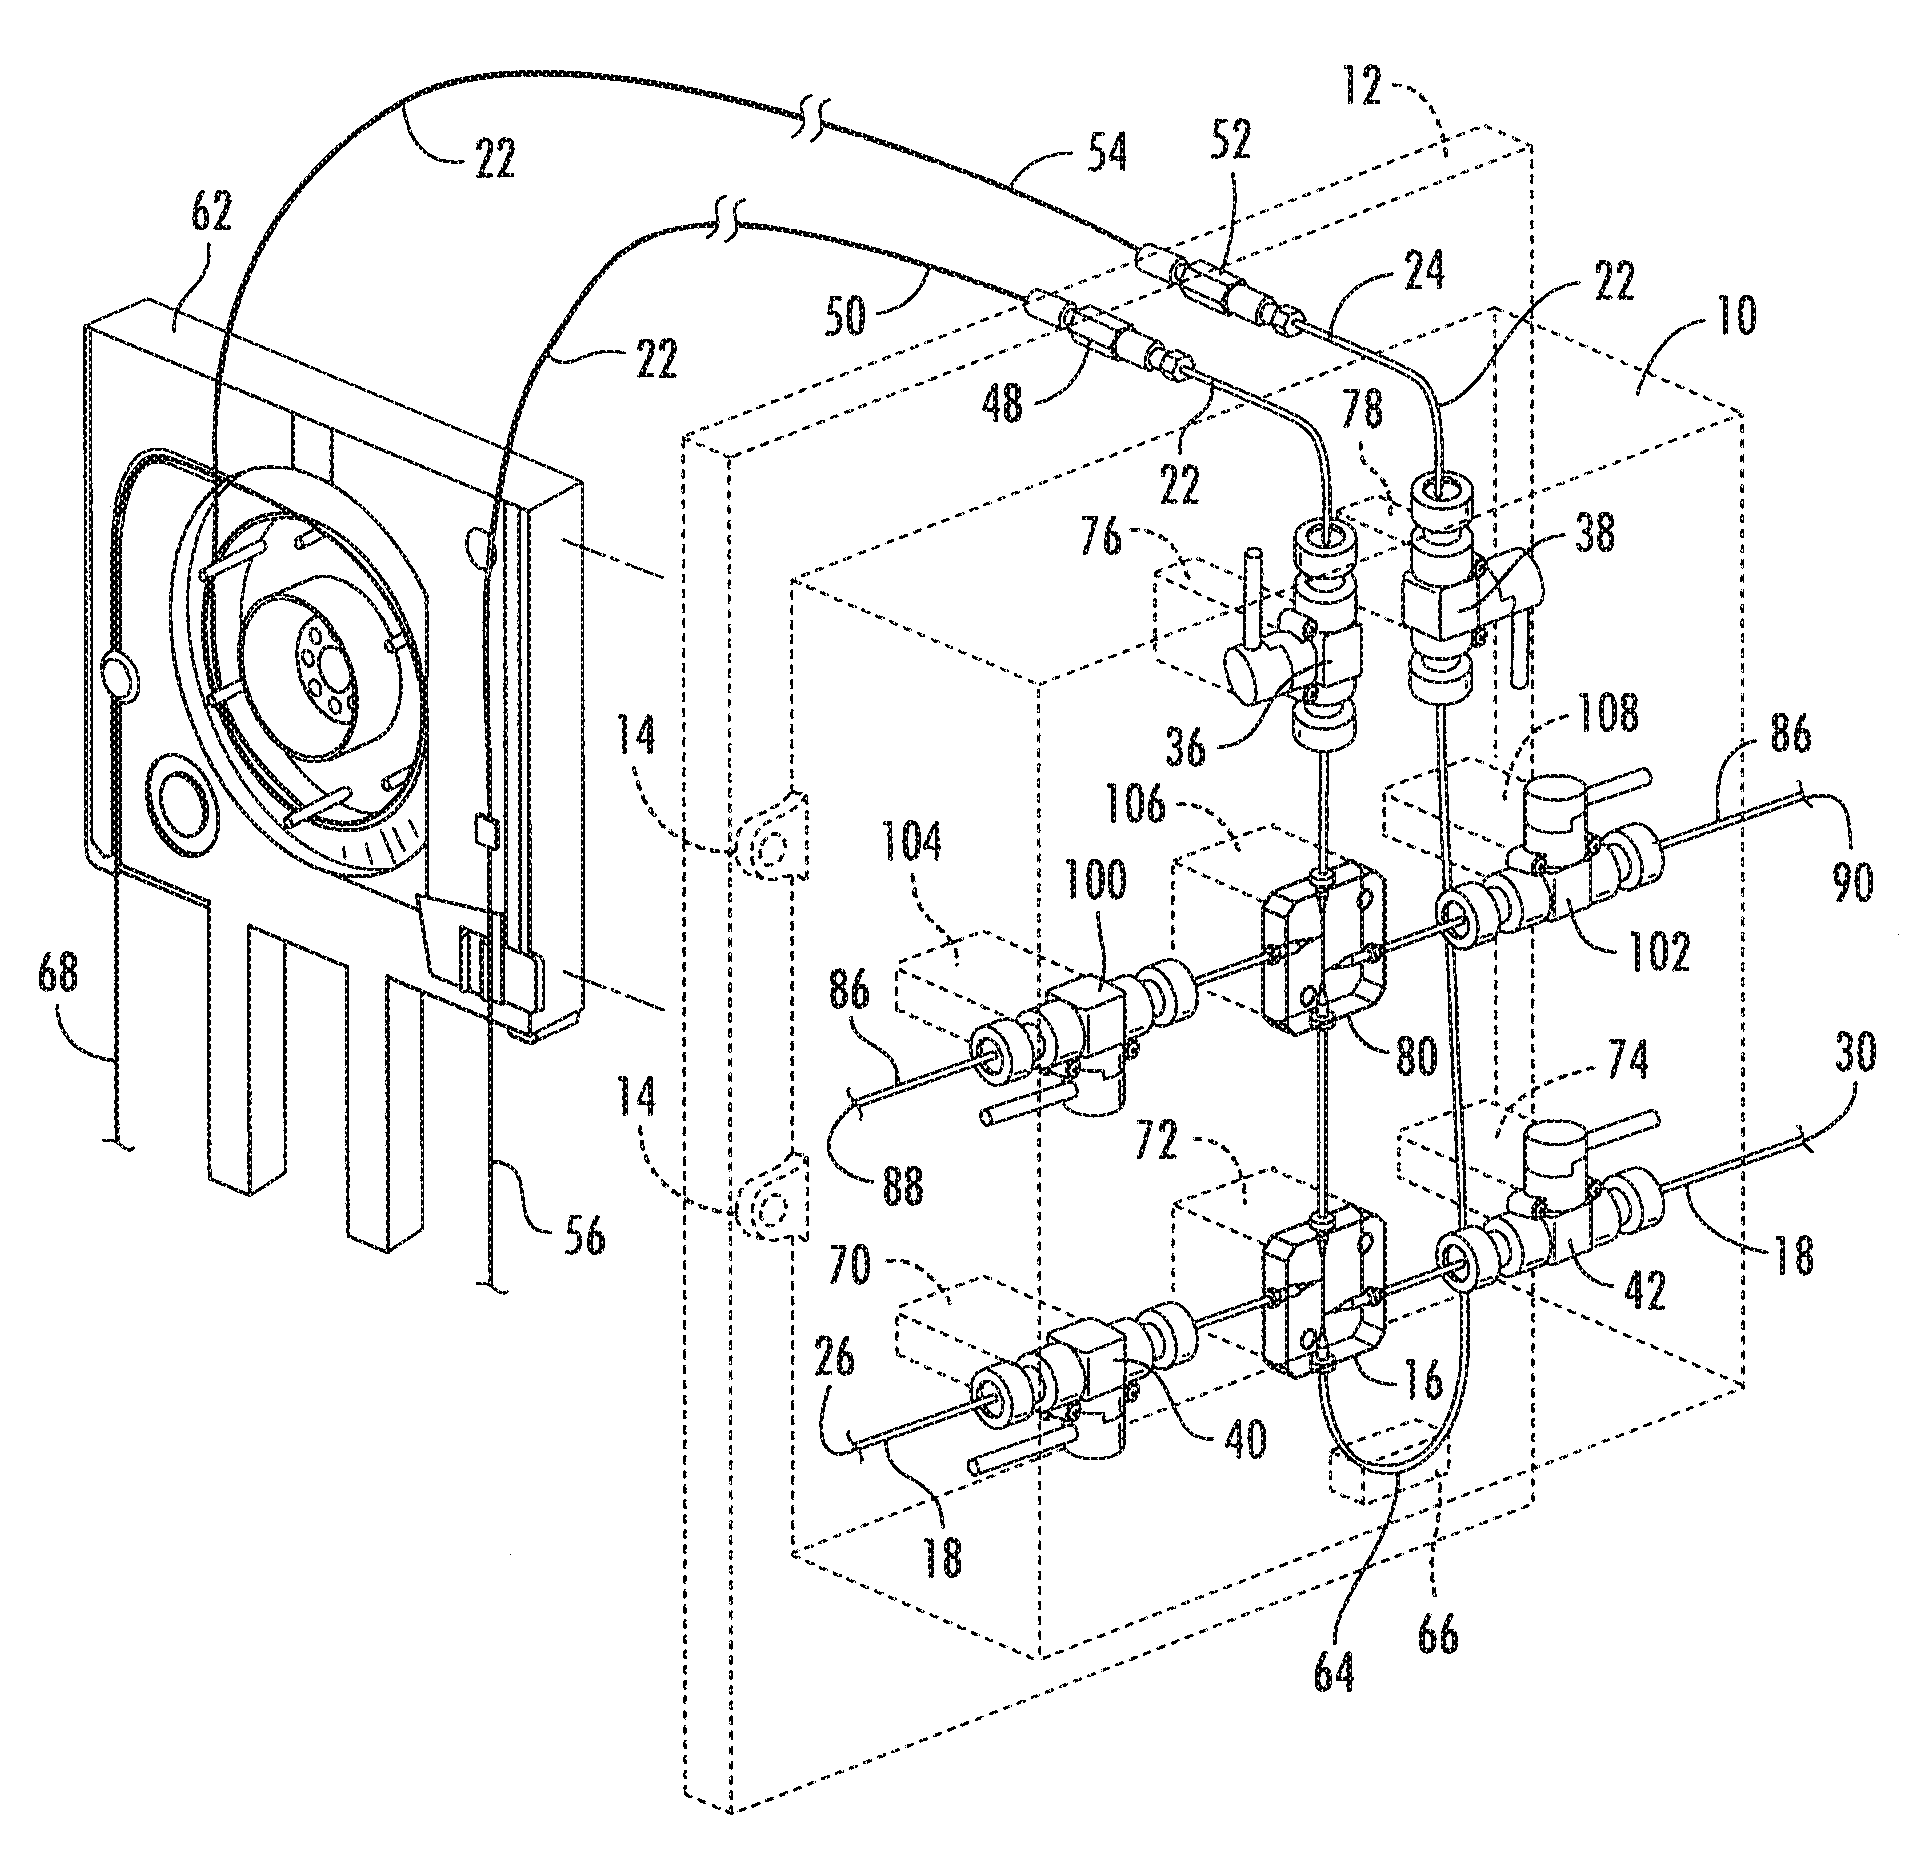 Integrated modular unit including an analyte concentrator-microreactor device connected to a cartridge-cassette